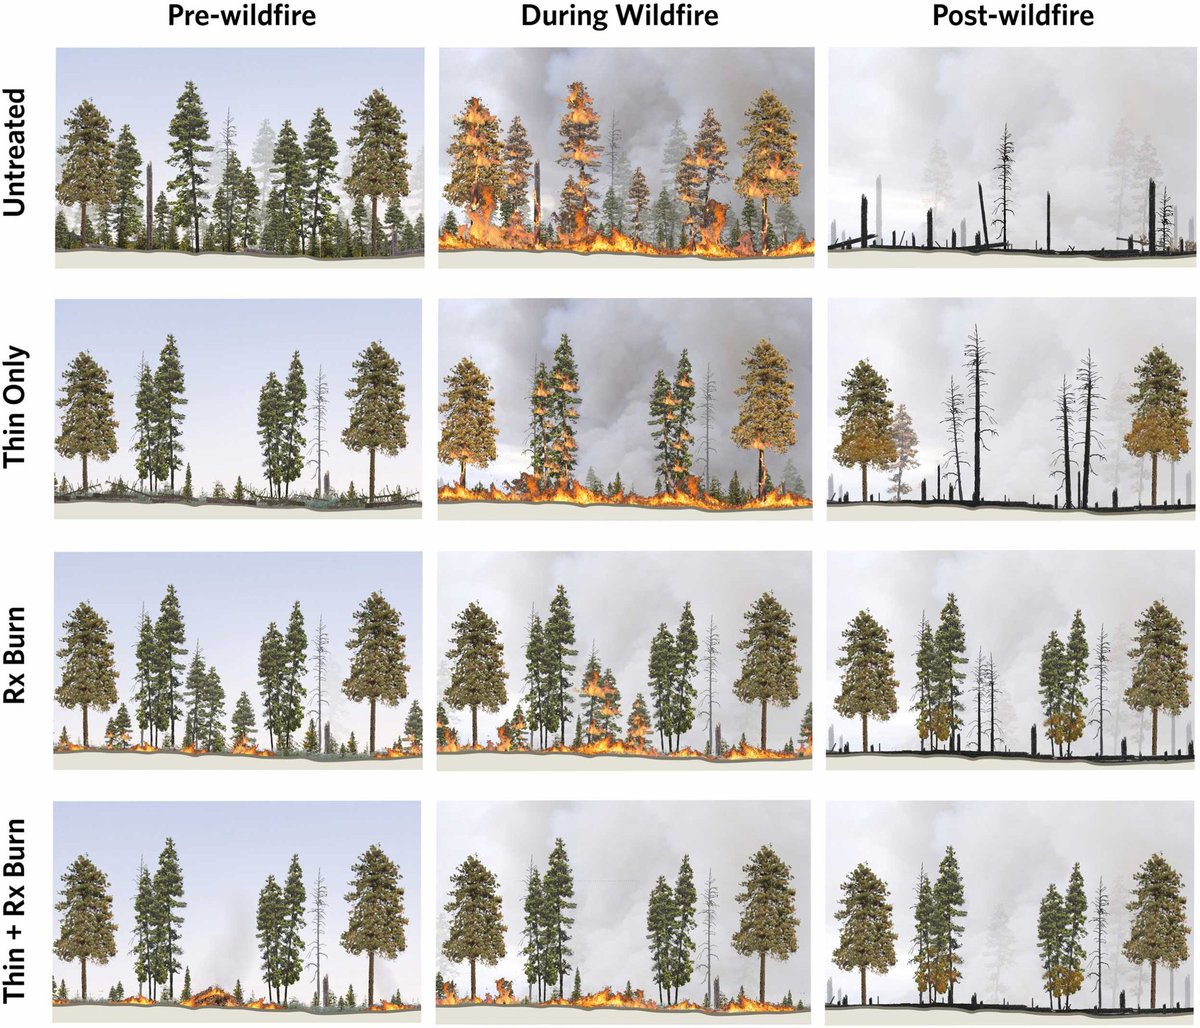 New meta-analysis on western forests and wildfire: 'We found overwhelming evidence that mechanical thinning with prescribed burning, mechanical thinning with pile burning, and prescribed burning only are effective at reducing subsequent wildfire severity.' sciencedirect.com/science/articl…